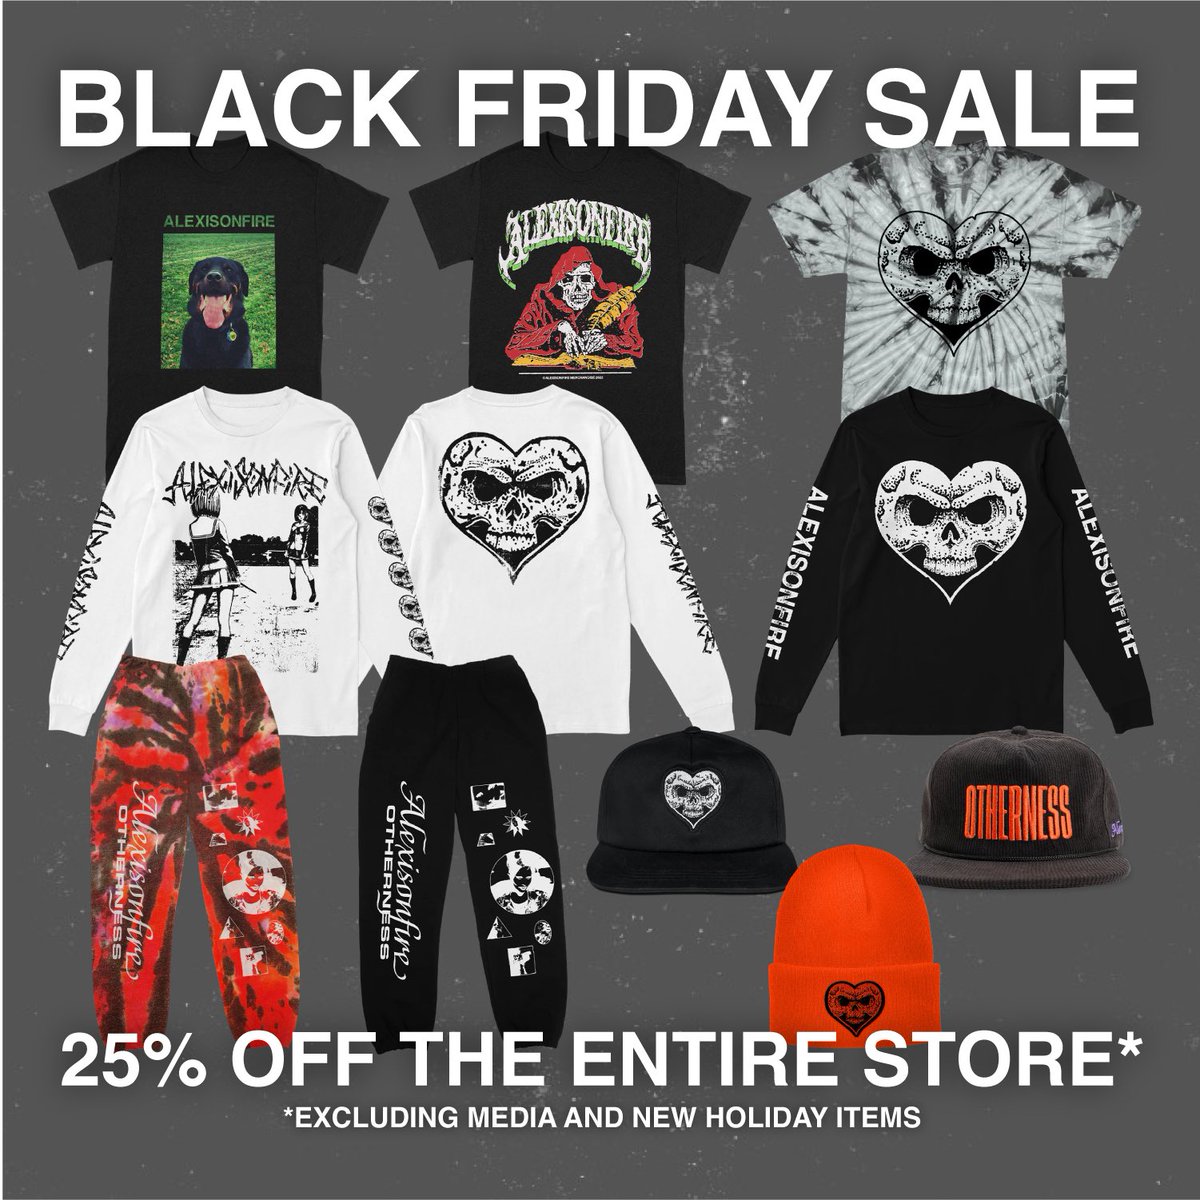 🫣Black Friday Sneak Peek 🫣 AOF Black Friday & holiday sale drops tomorrow starting at 11am ET. Annual limited edition Black•Black Friday print + Black•Black Friday toque + ornaments + storewide sale 🎄🖤 🔜 theonlybandever.com